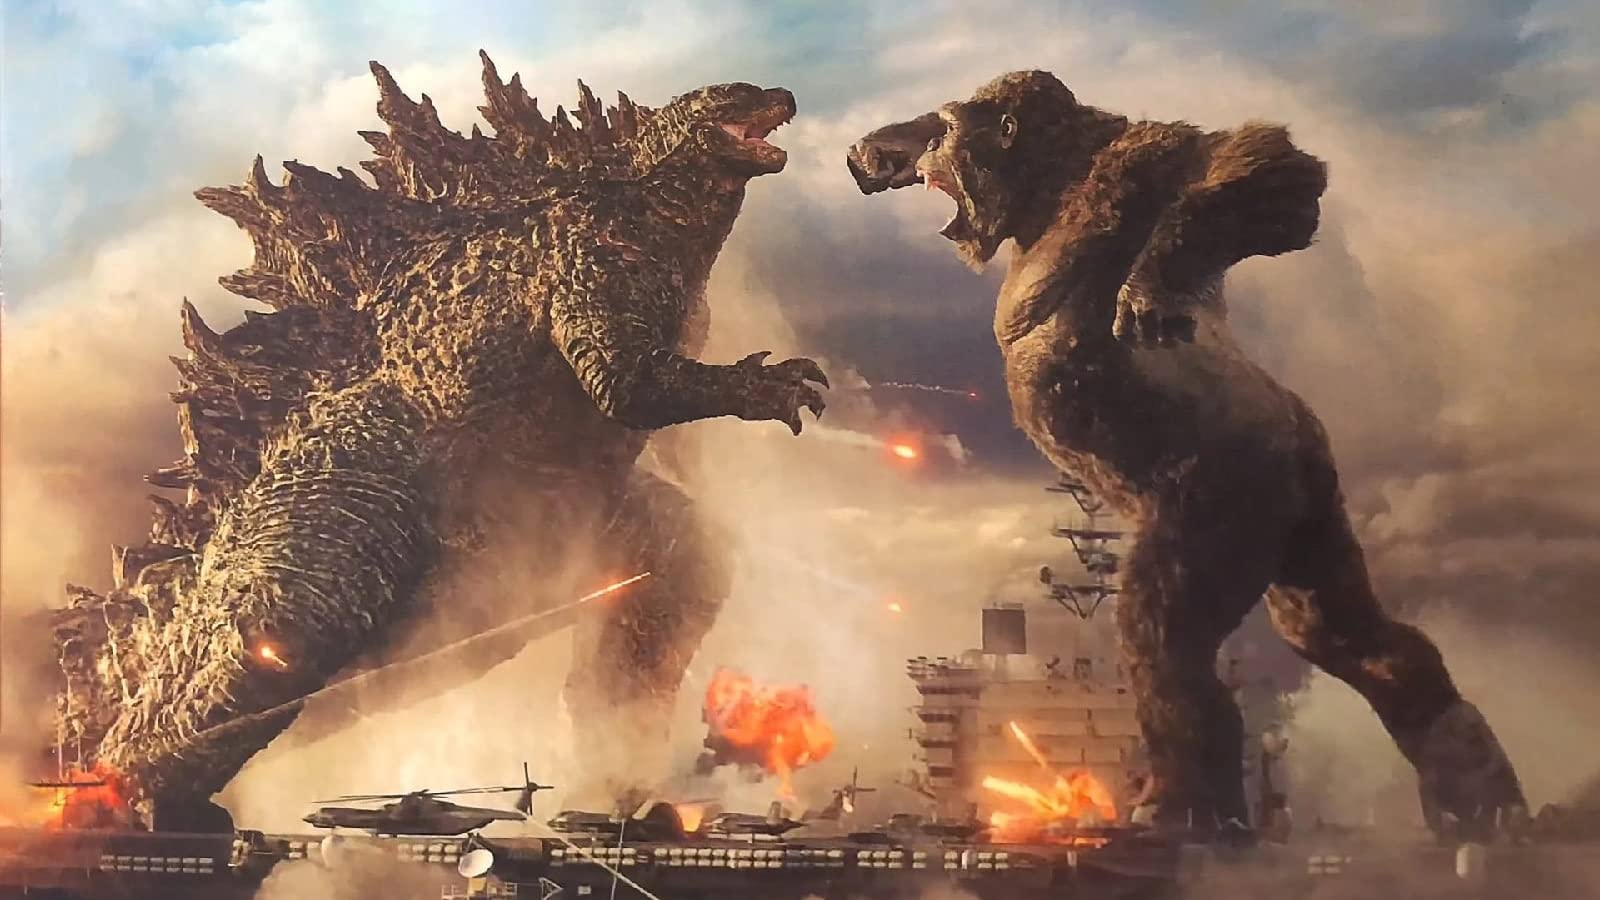 ‘GODZILLA VS. KONG’ sequel set to start filming in Australia, later this year